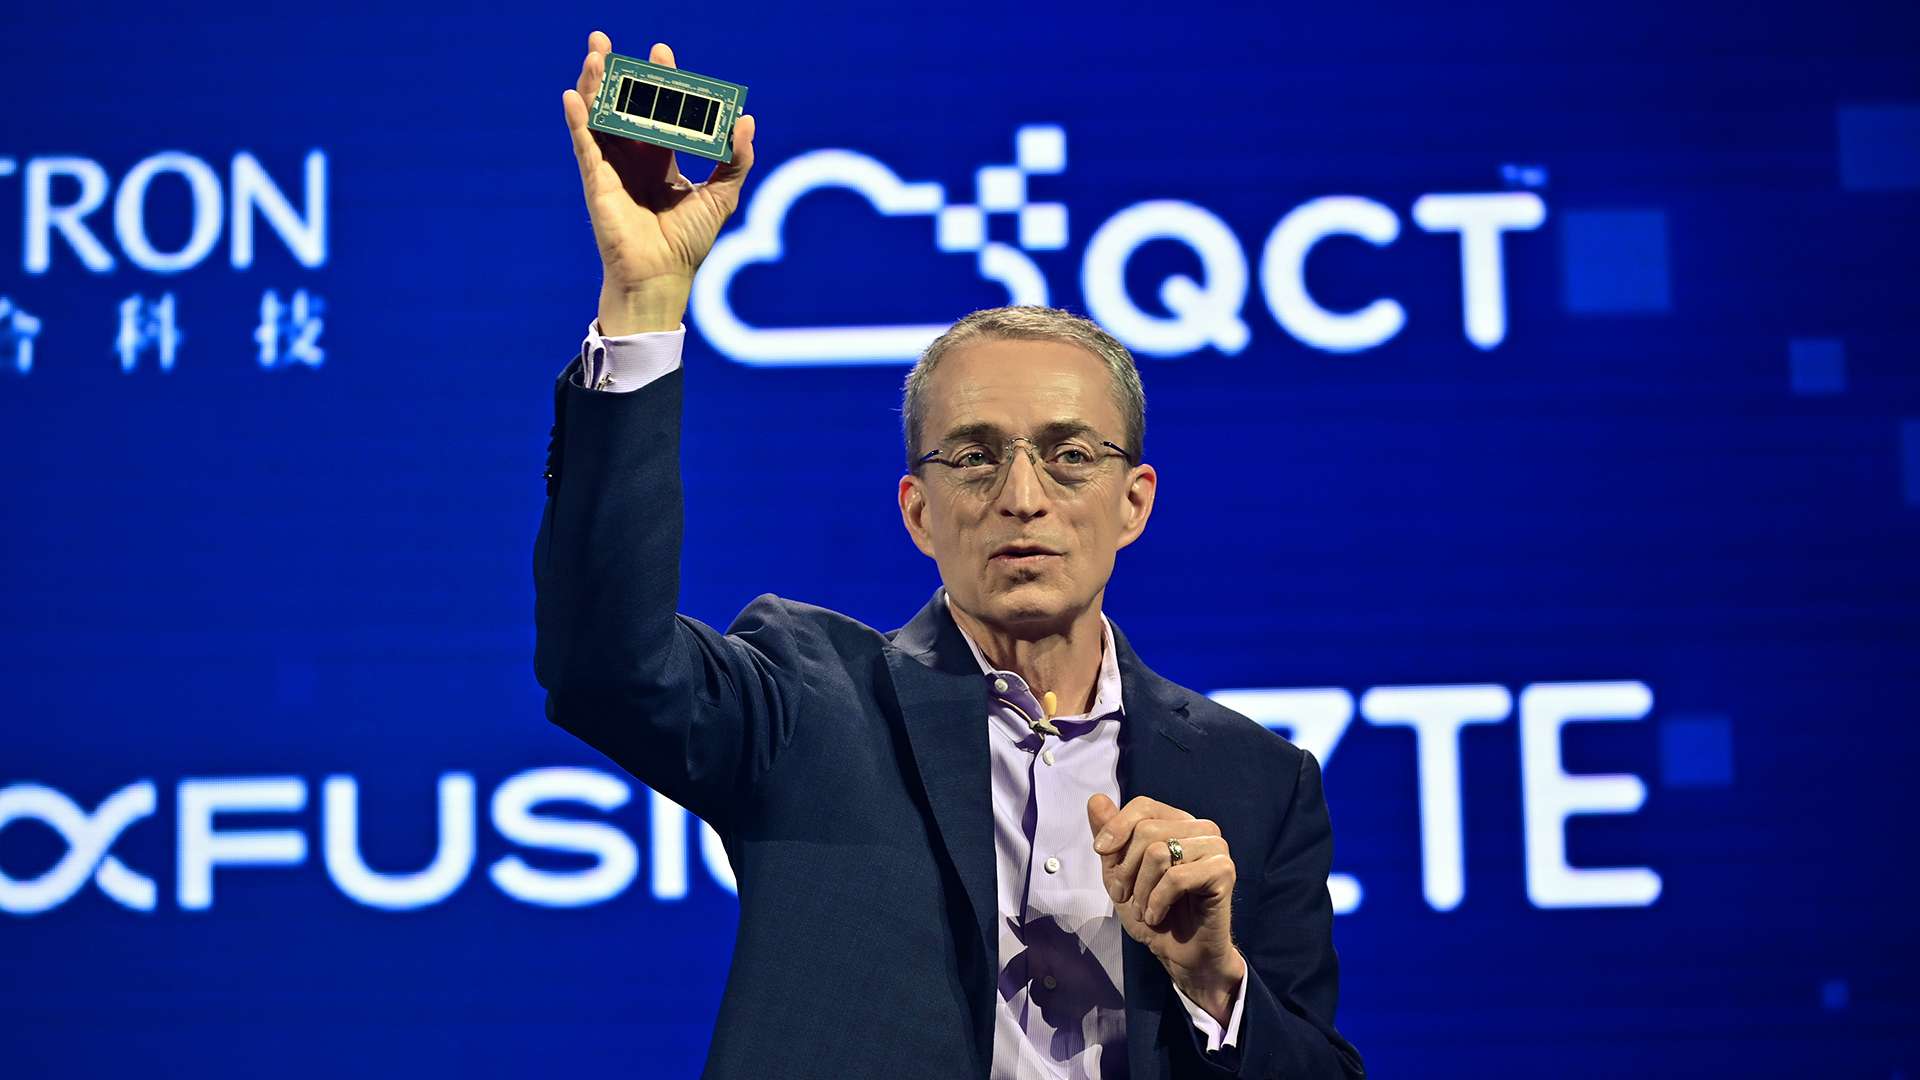 At Computex Taiwan, Intel CEO Pat Gelsinger revealed that Intel is preparing to launch Intel Xeon 6 processors with Performance-cores (code-named Granite Rapids) in the third quarter of 2024. At Computex in Taipei, Taiwan, on June 4, 2024, Intel unveiled cutting-edge technologies and architectures poised to accelerate the artificial intelligence ecosystem. (Credit: Intel Corporation)